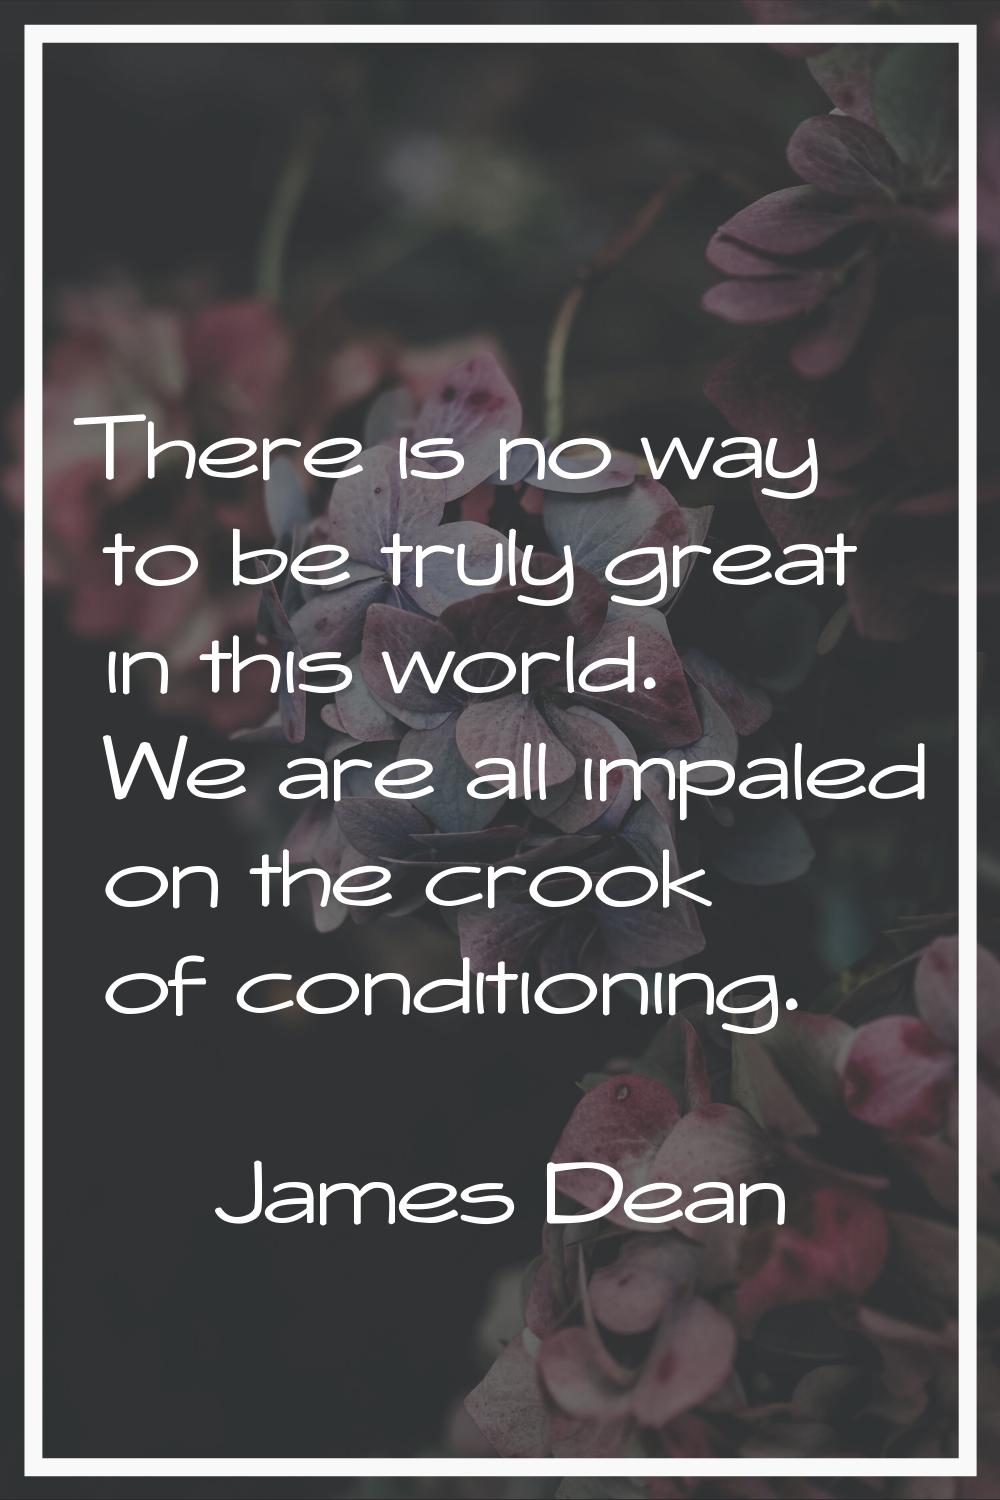 There is no way to be truly great in this world. We are all impaled on the crook of conditioning.